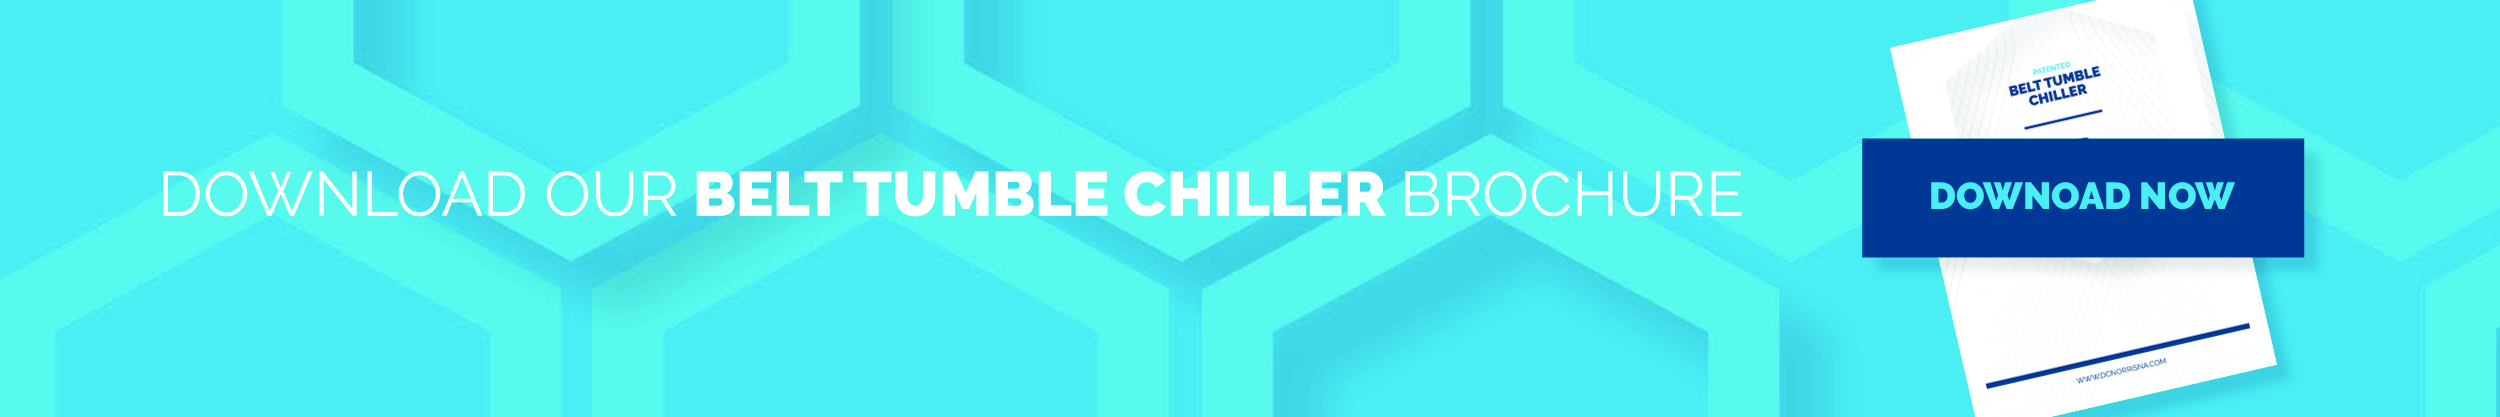 image of the belt tumble chiller brochure on a bright blue background with text that reads download our belt tumble chiller brochure